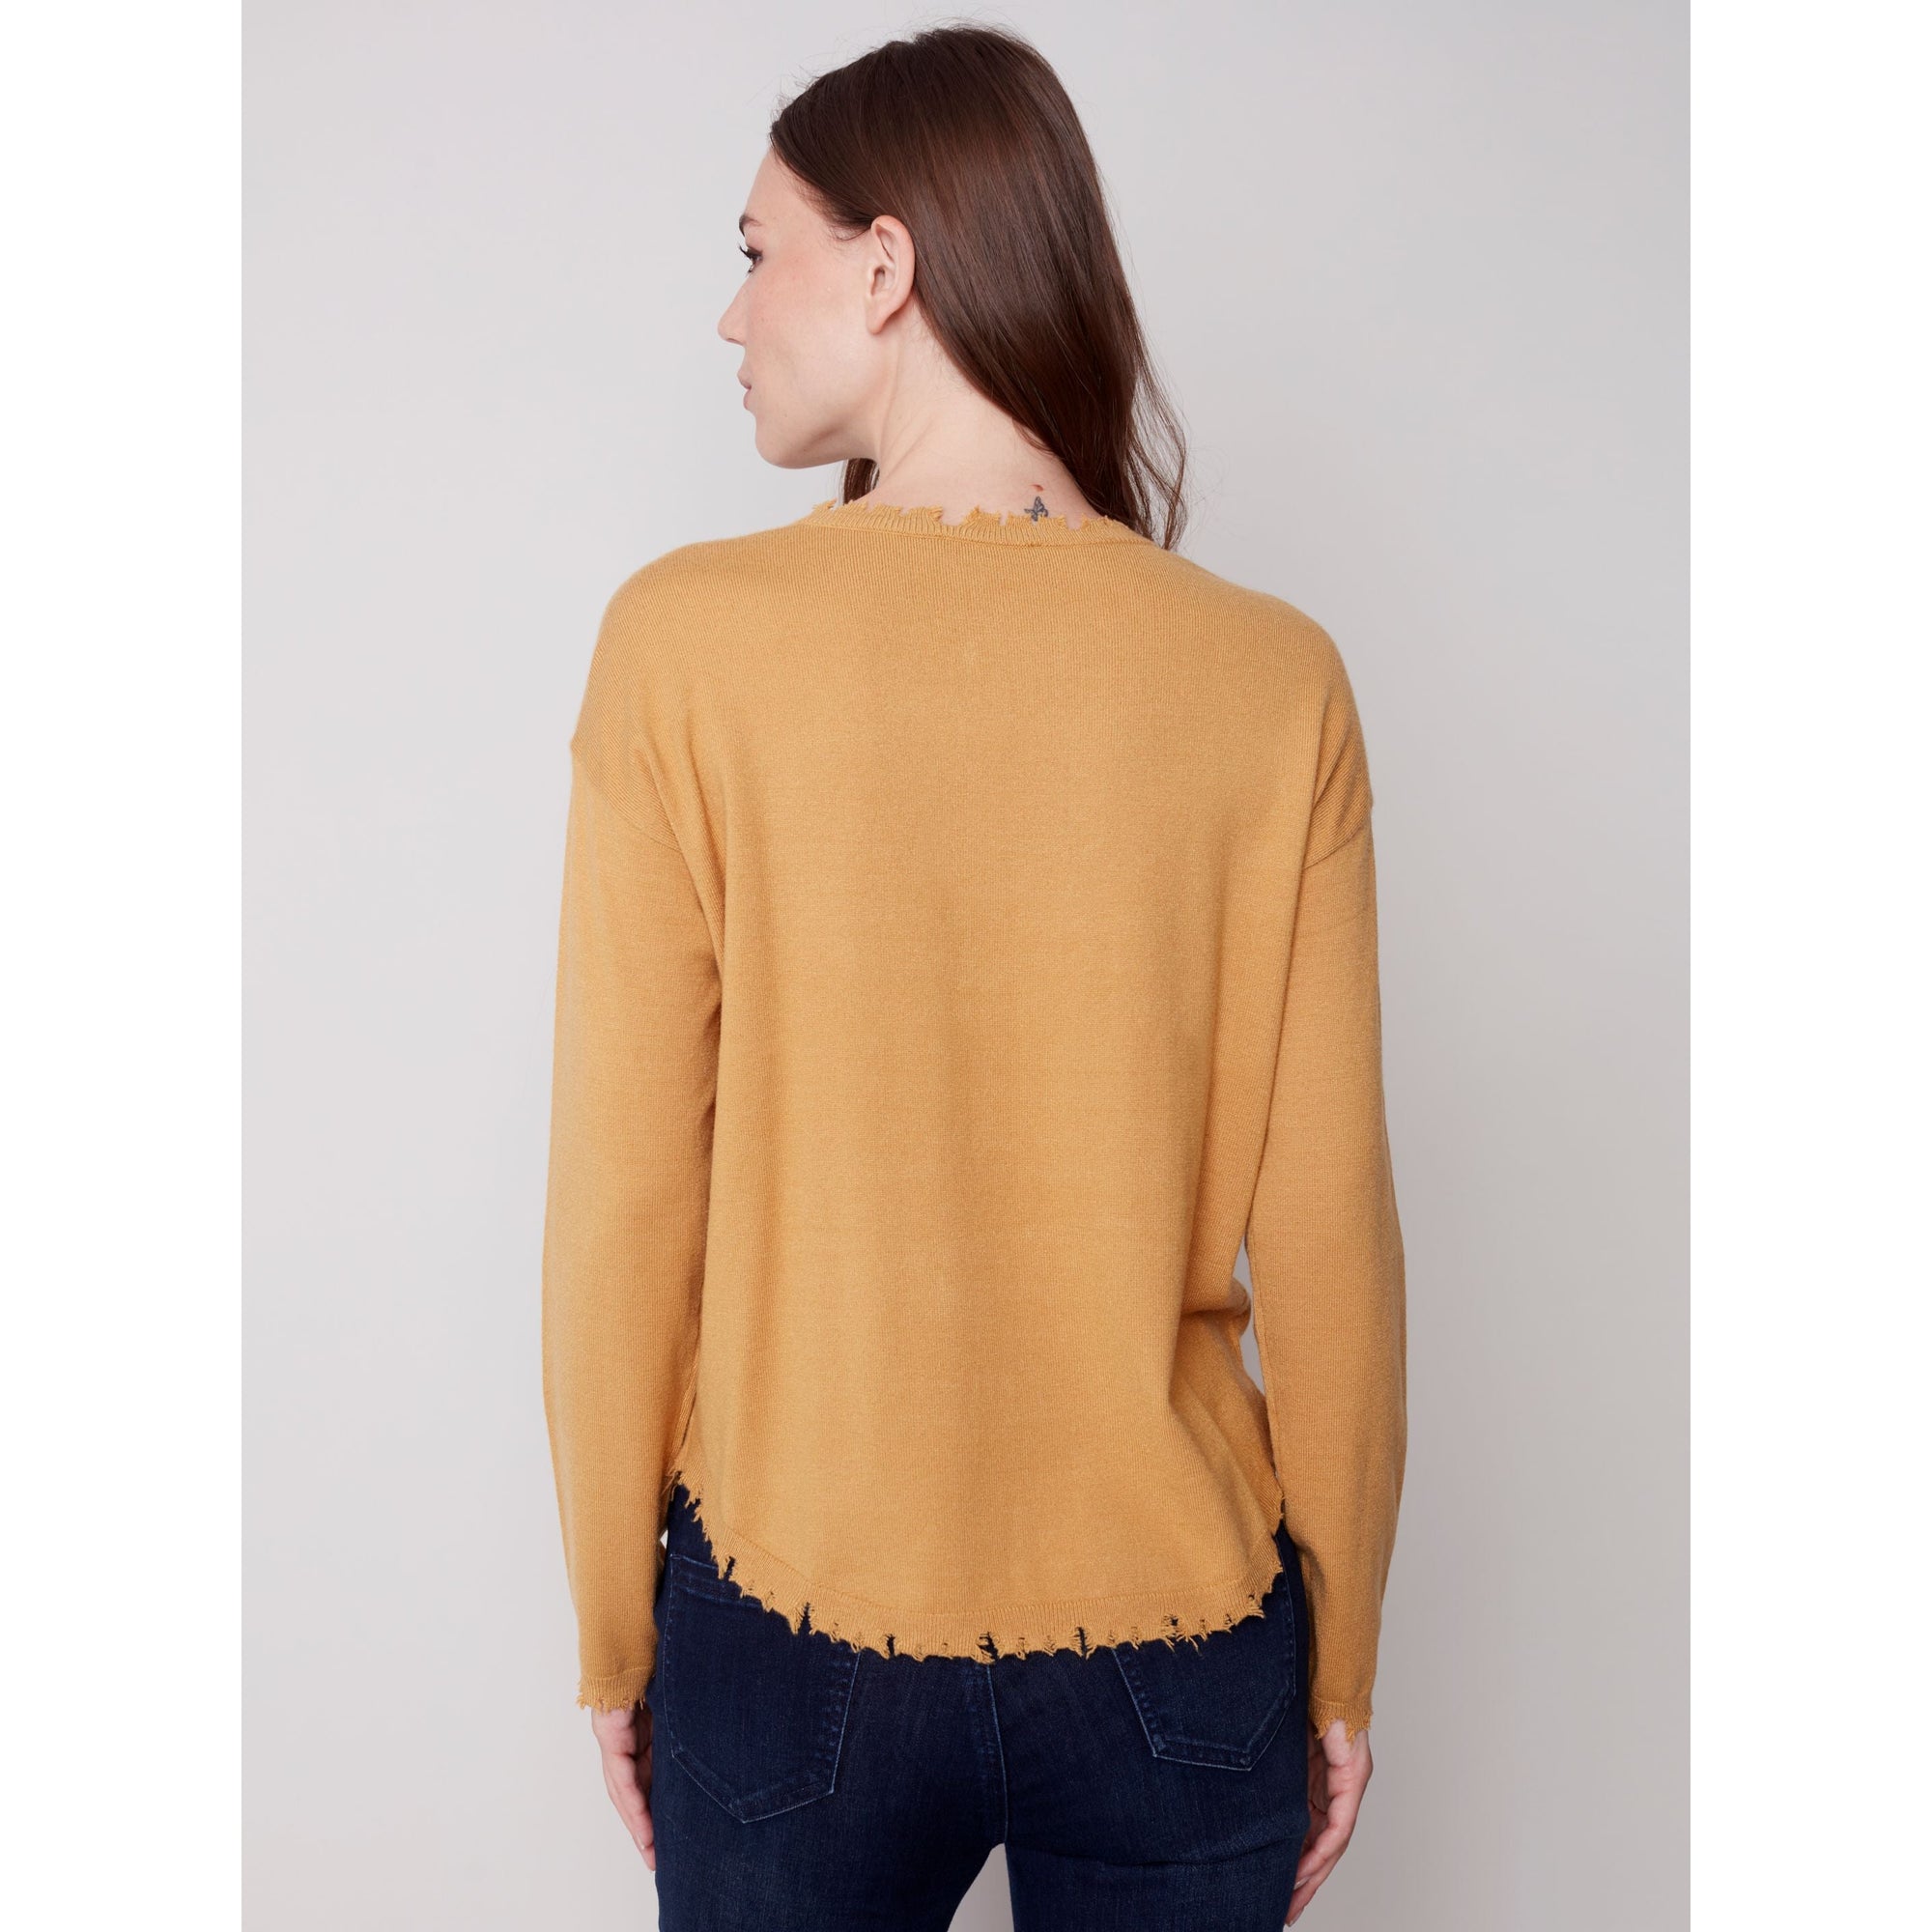 FRAYED EDGE SWEATER - GOLD-Jackets & Sweaters-CHARLIE B-SMALL-GOLD-Coriander